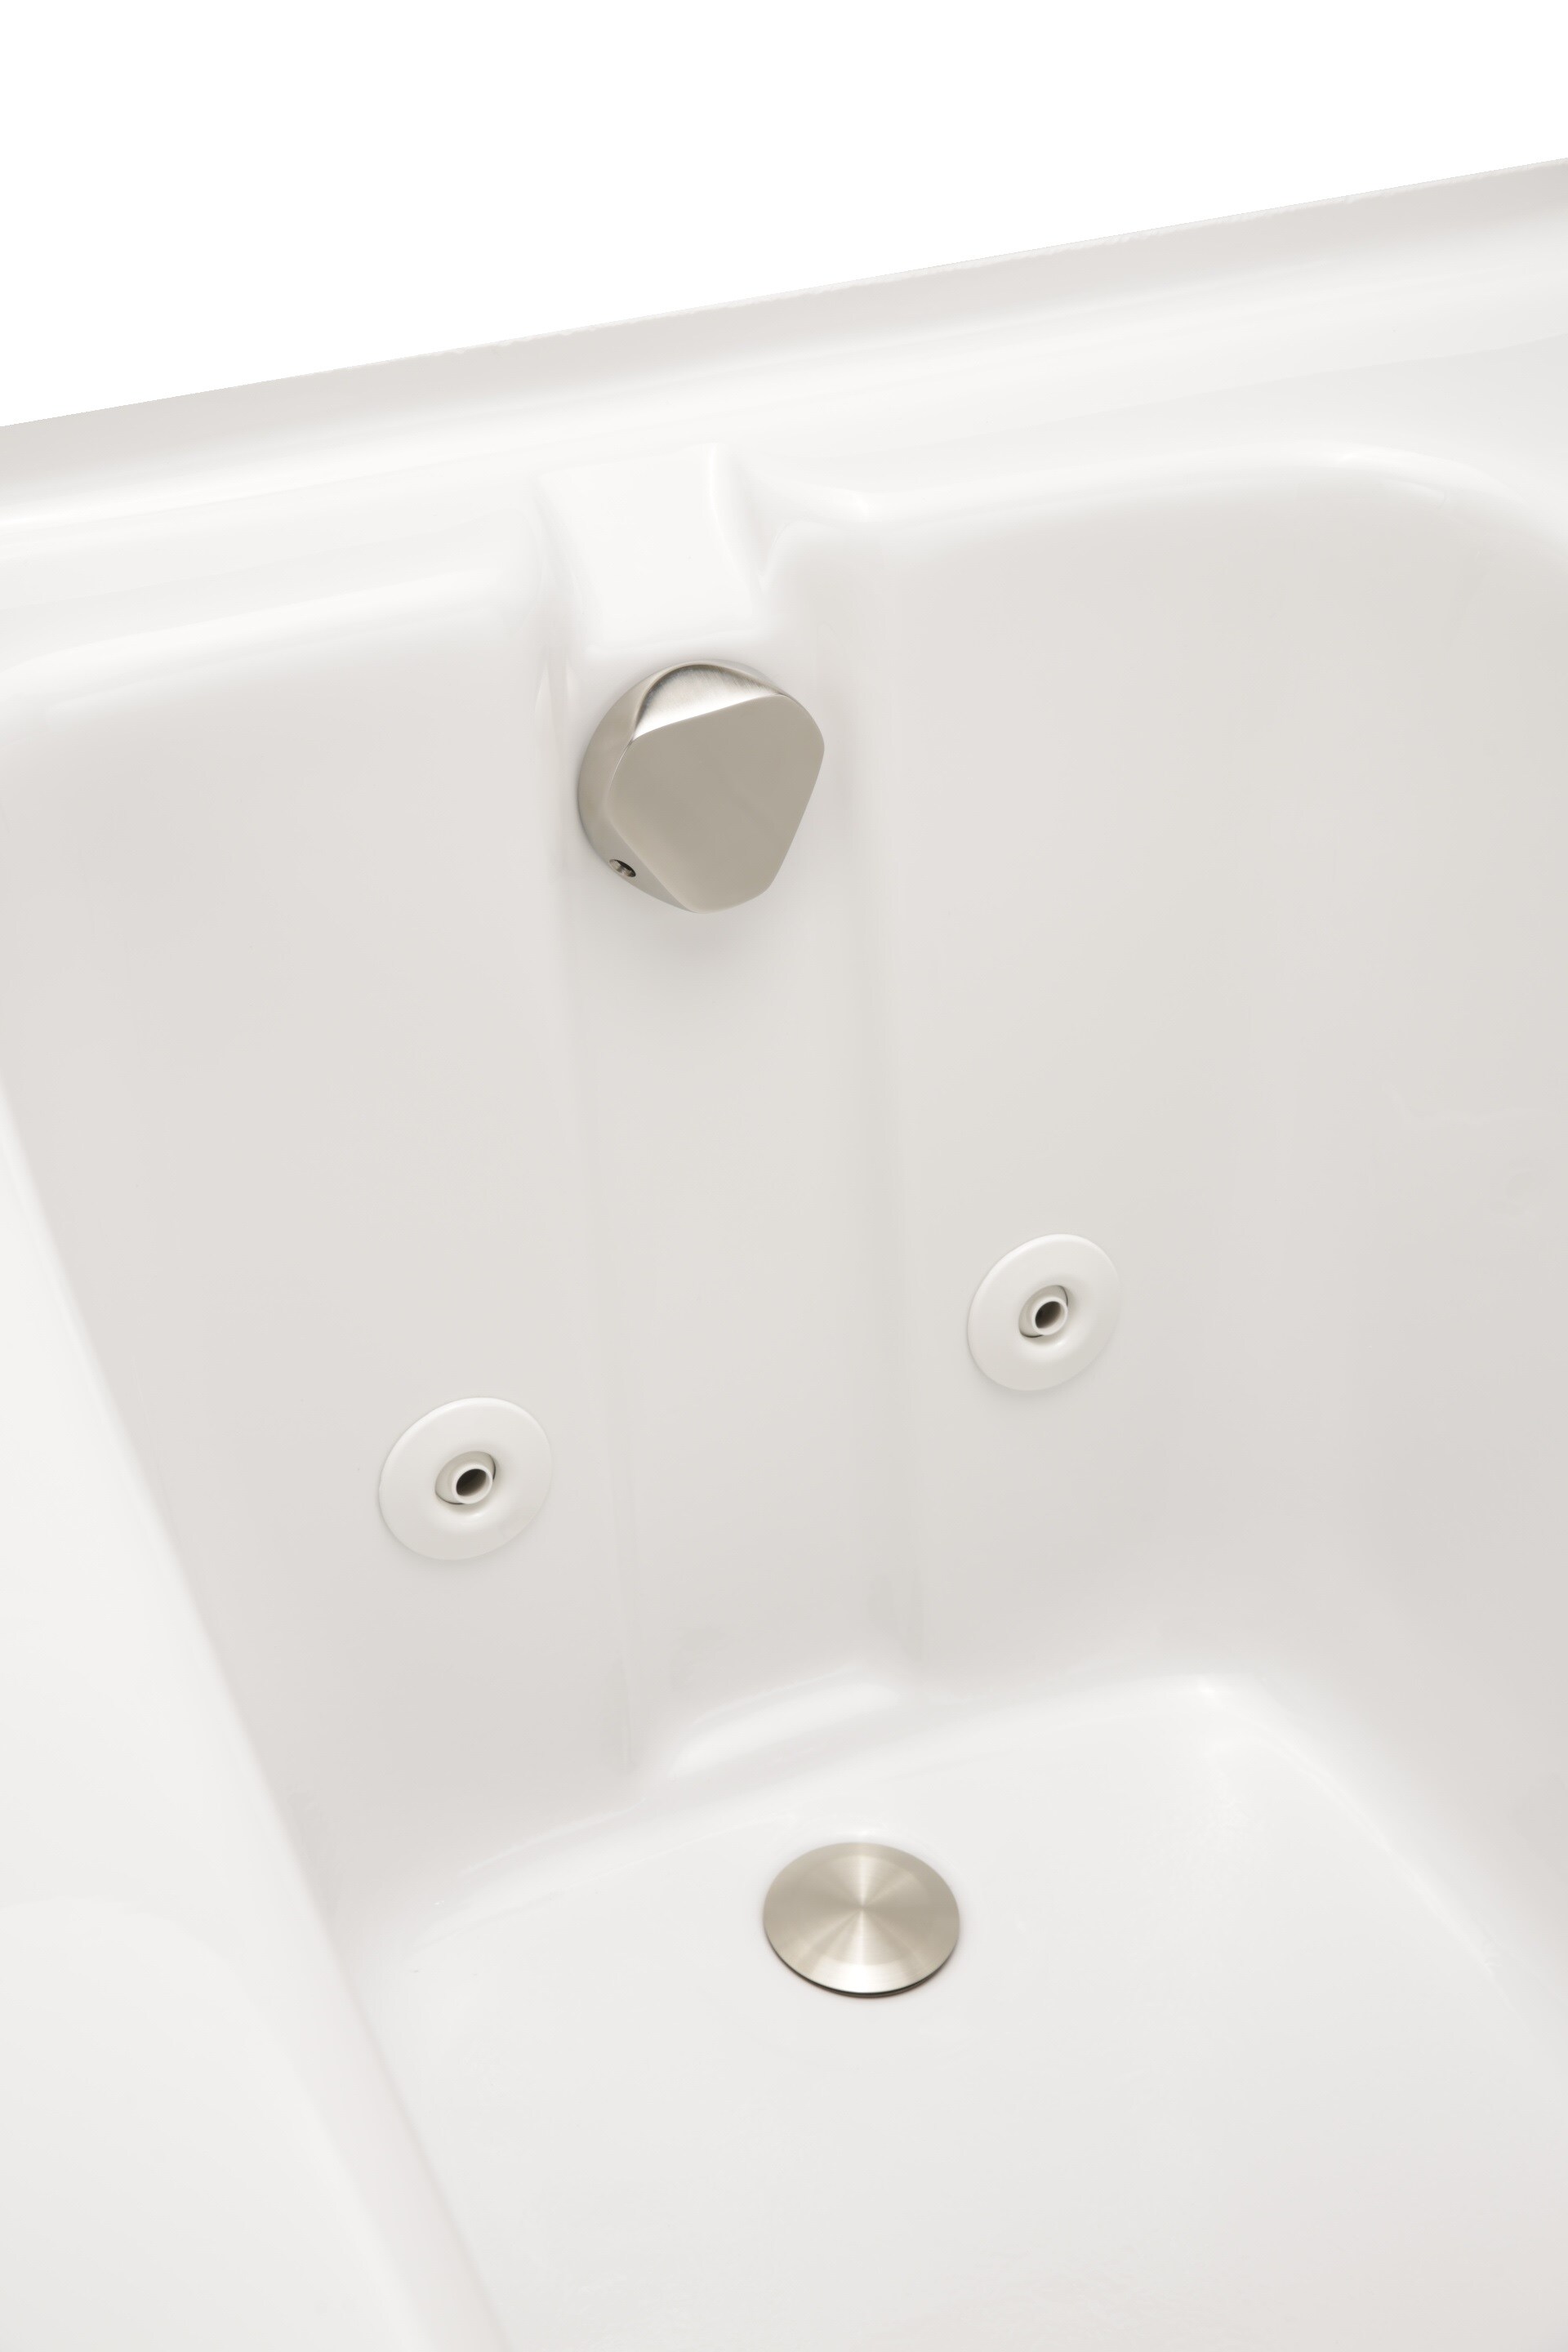 Flexible Bathtub Drains & Cable-Operated Waste and Overflow Kits